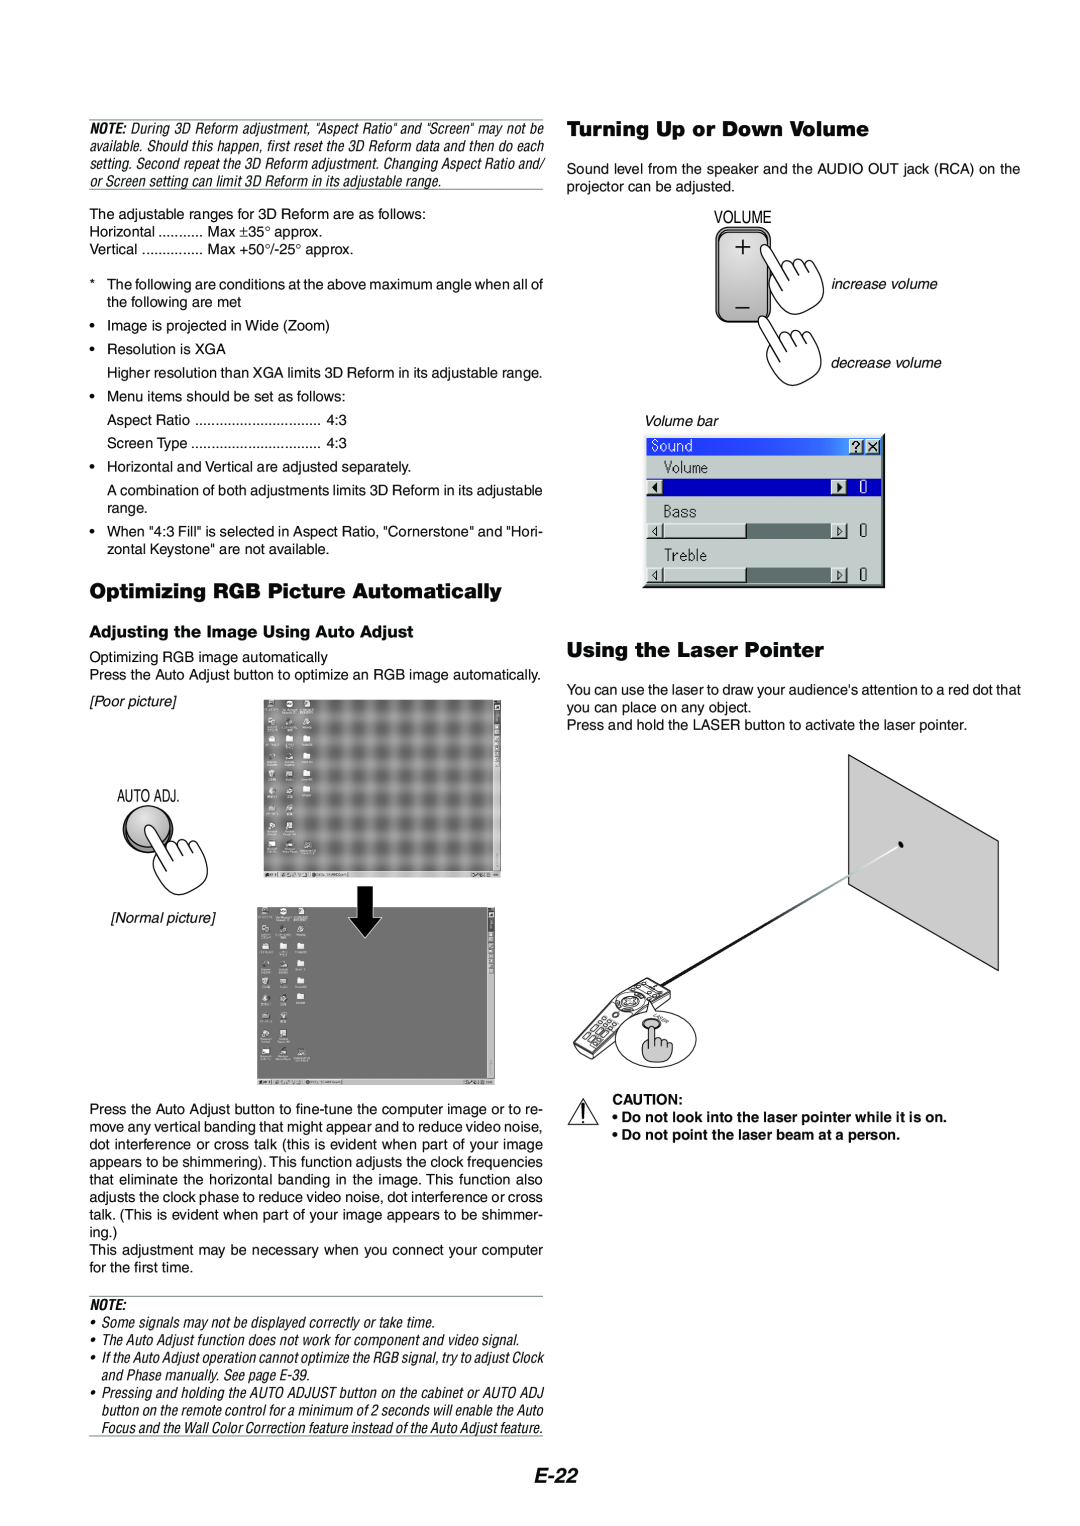 NEC MT1065/MT1060 Optimizing RGB Picture Automatically, Turning Up or Down Volume, Using the Laser Pointer, E-22 